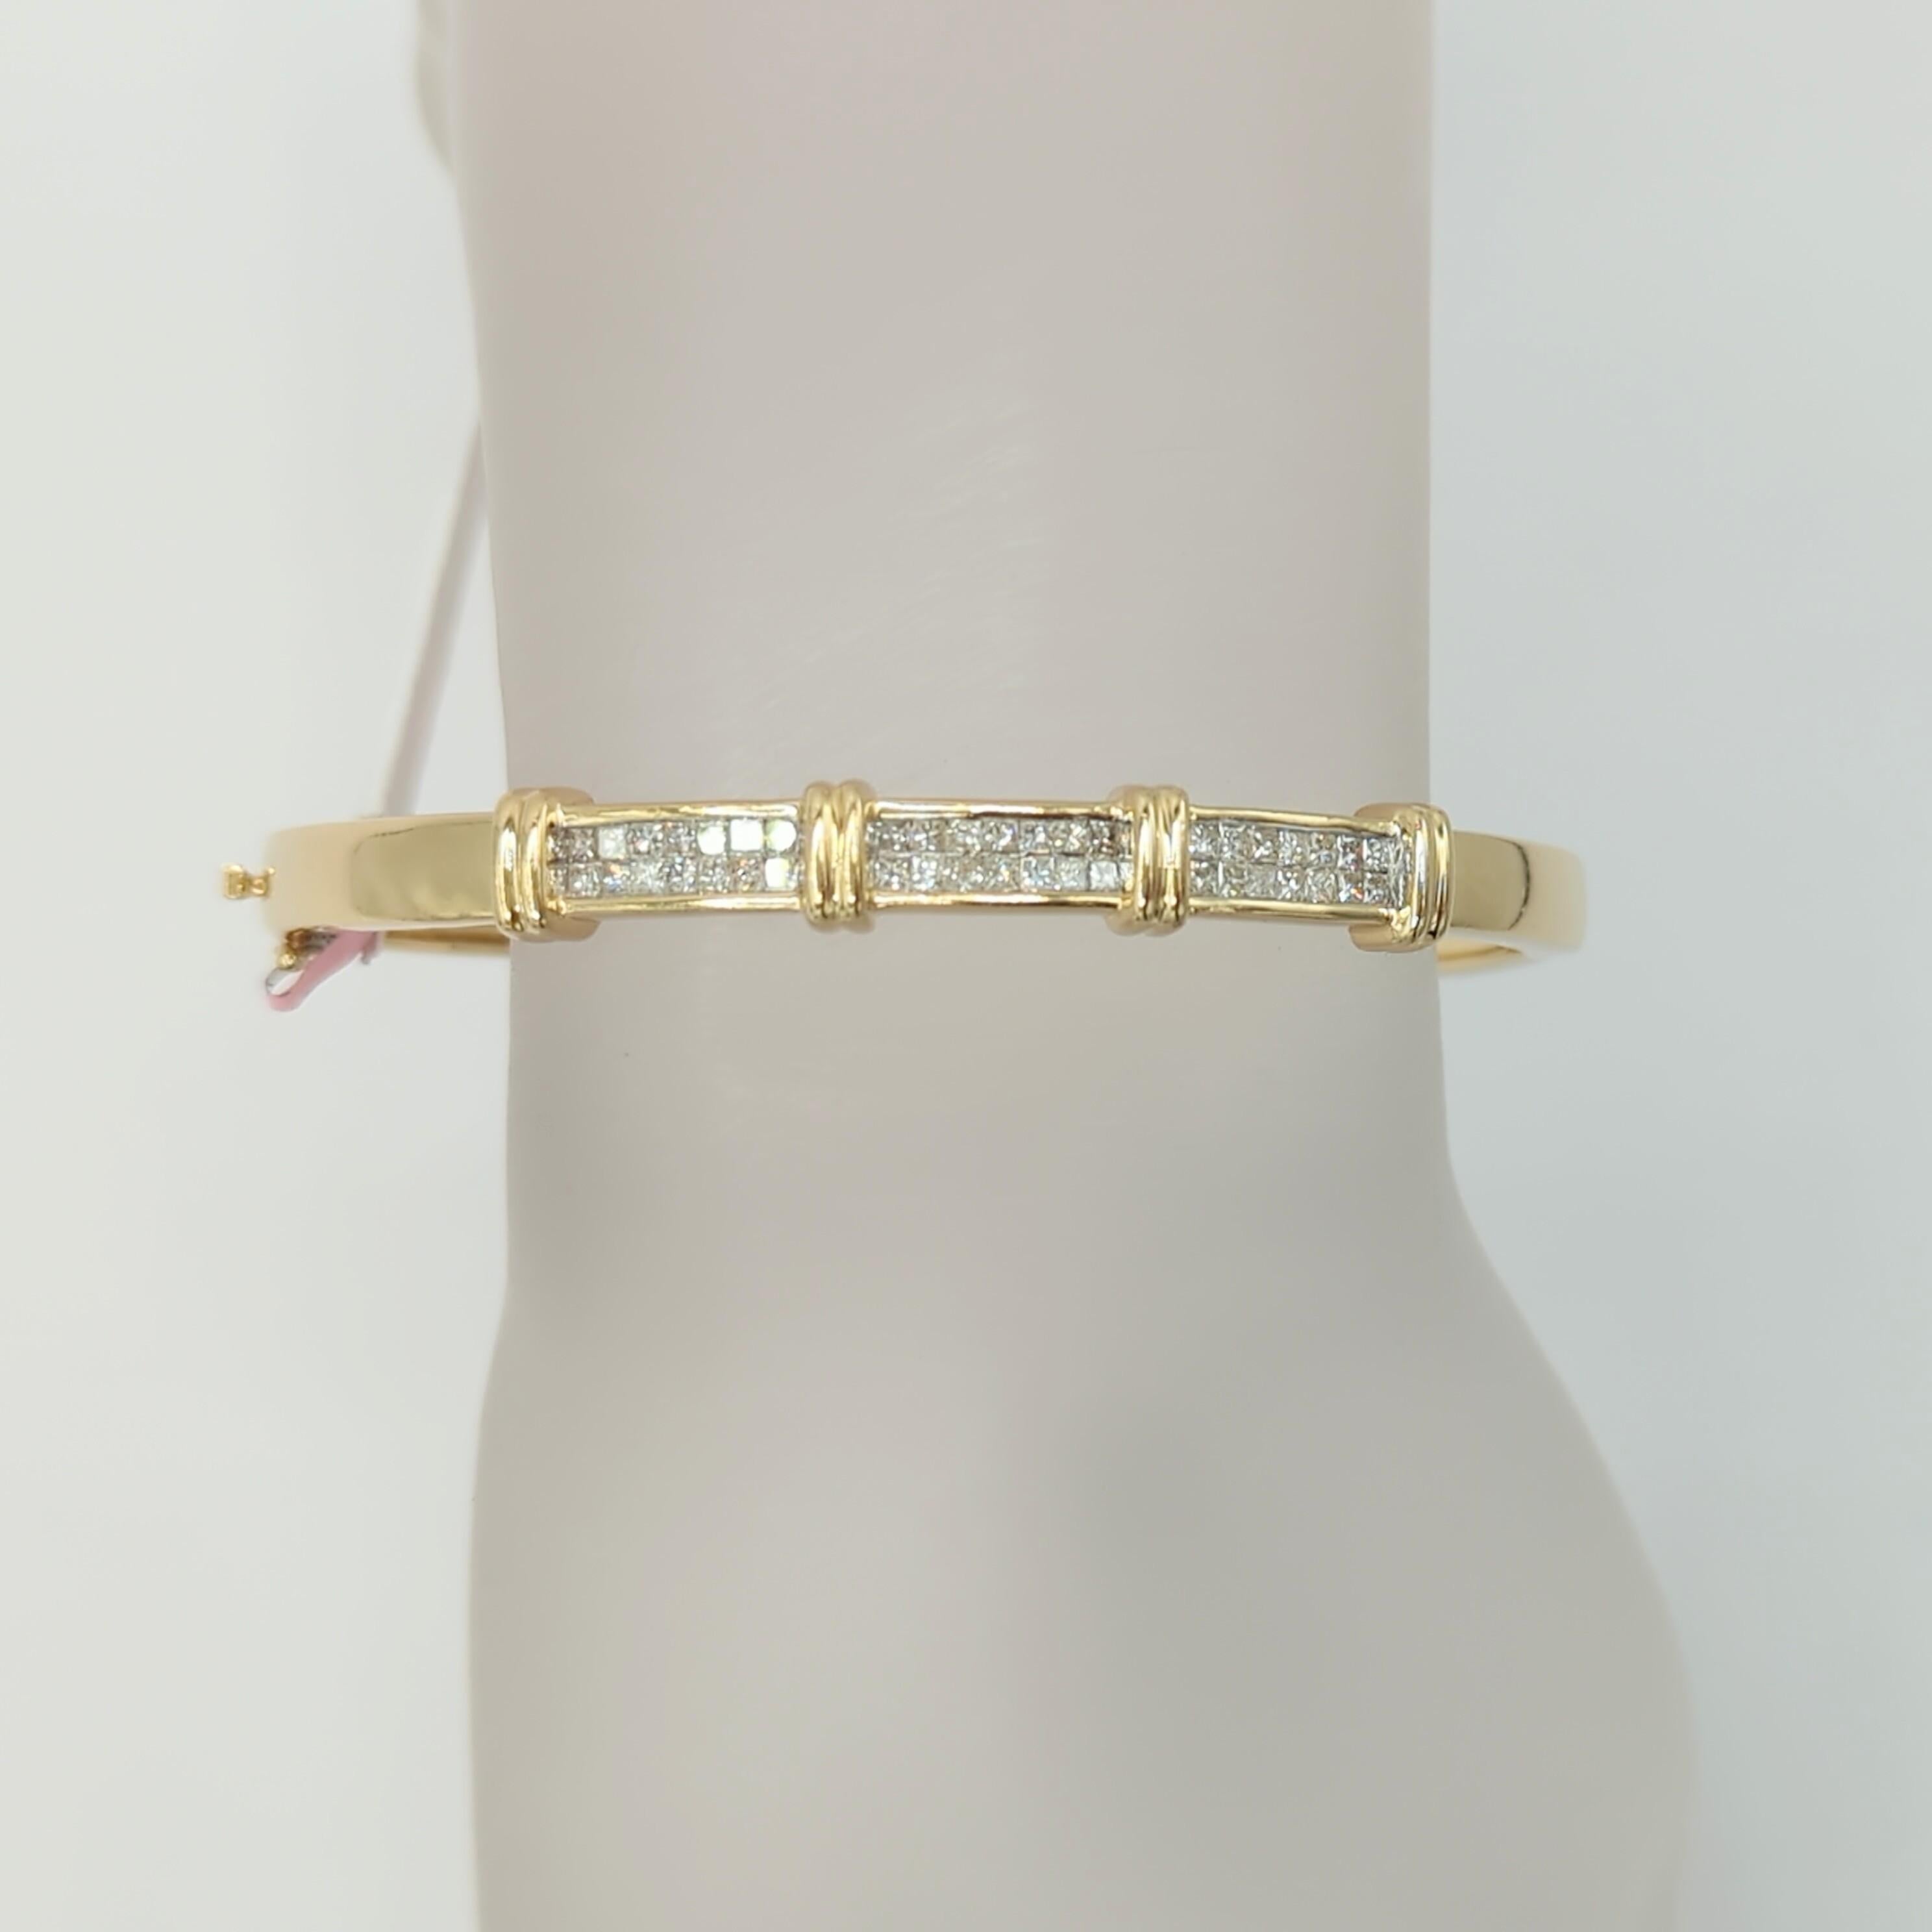 Beautiful 2.50 ct. white diamond princess cuts handmade in 14k yellow gold.  This is a great bangle to stack with a watch, other bracelets/bangles, or to wear on it's own.